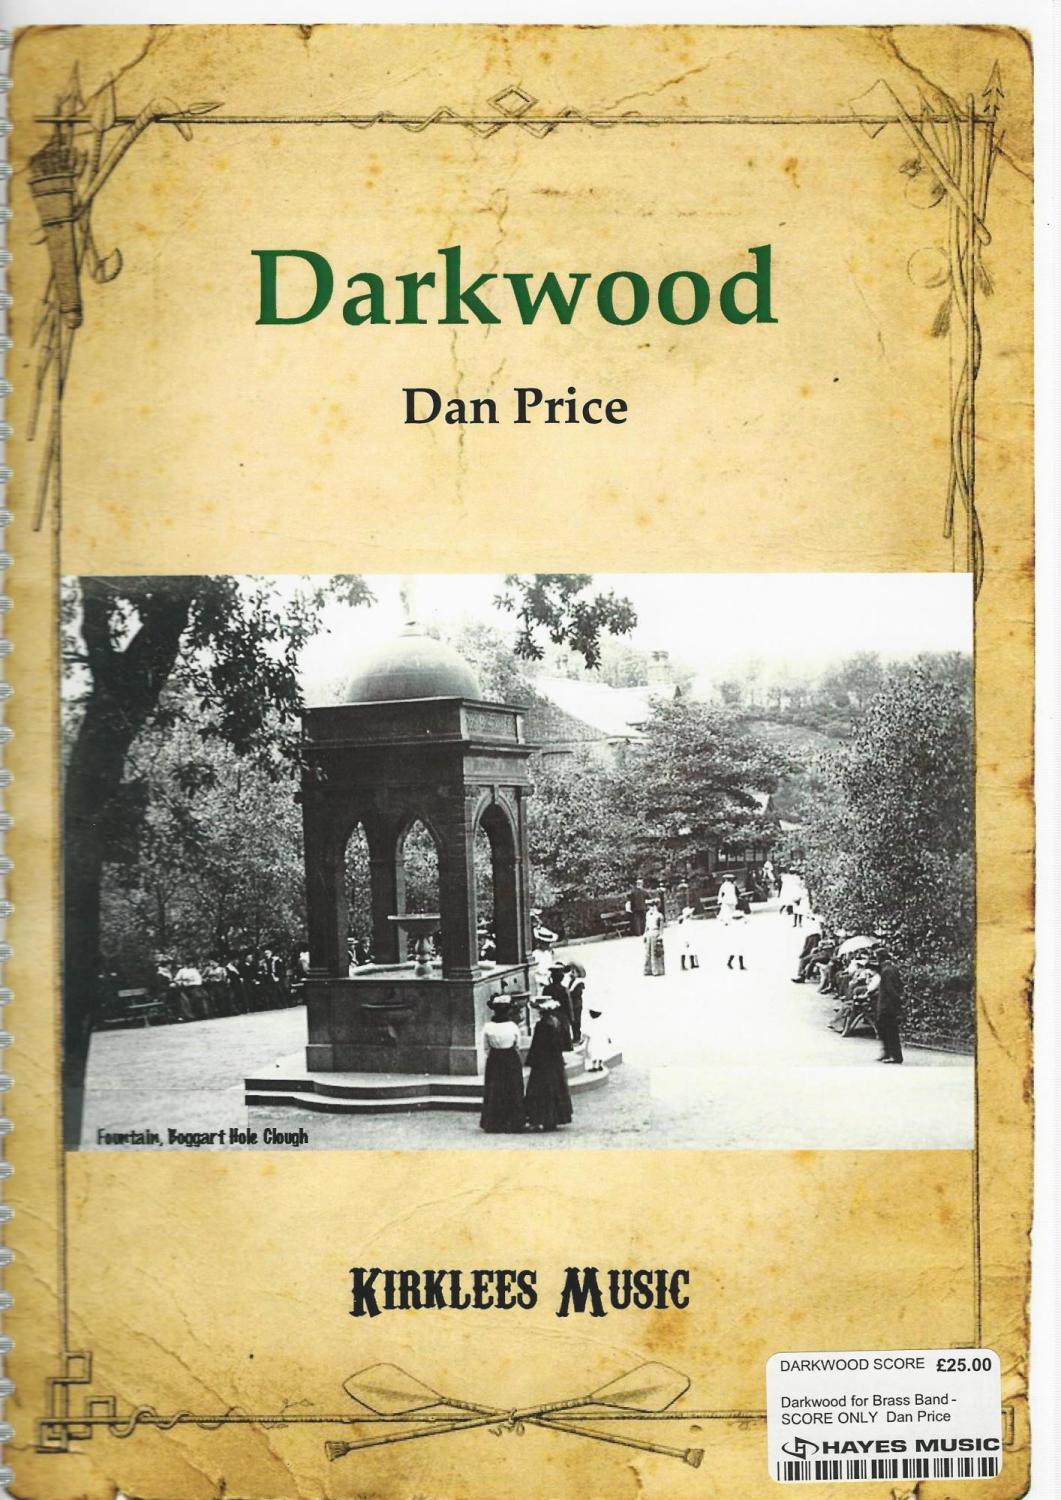 Darkwood for Brass Band - SCORE ONLY  Dan Price